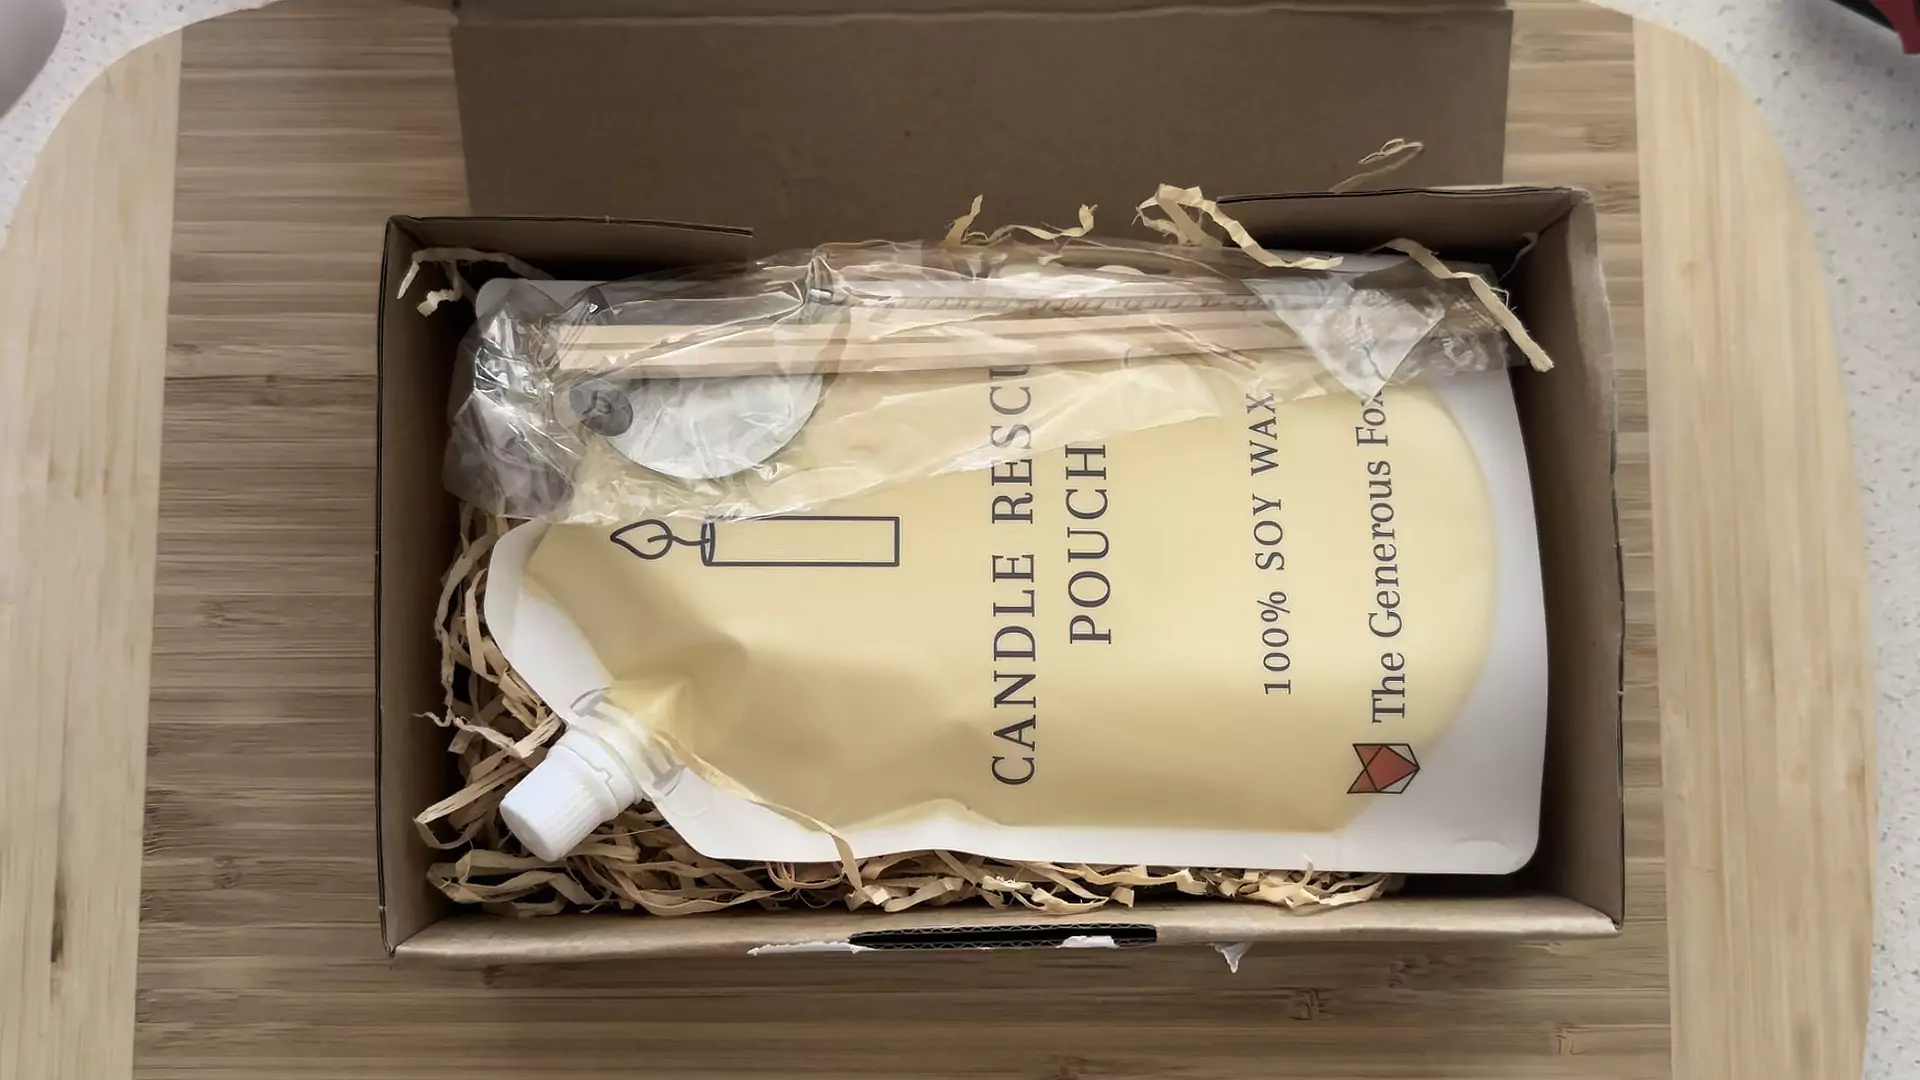 A Review of Candle Rescue's DIY Candle Kits